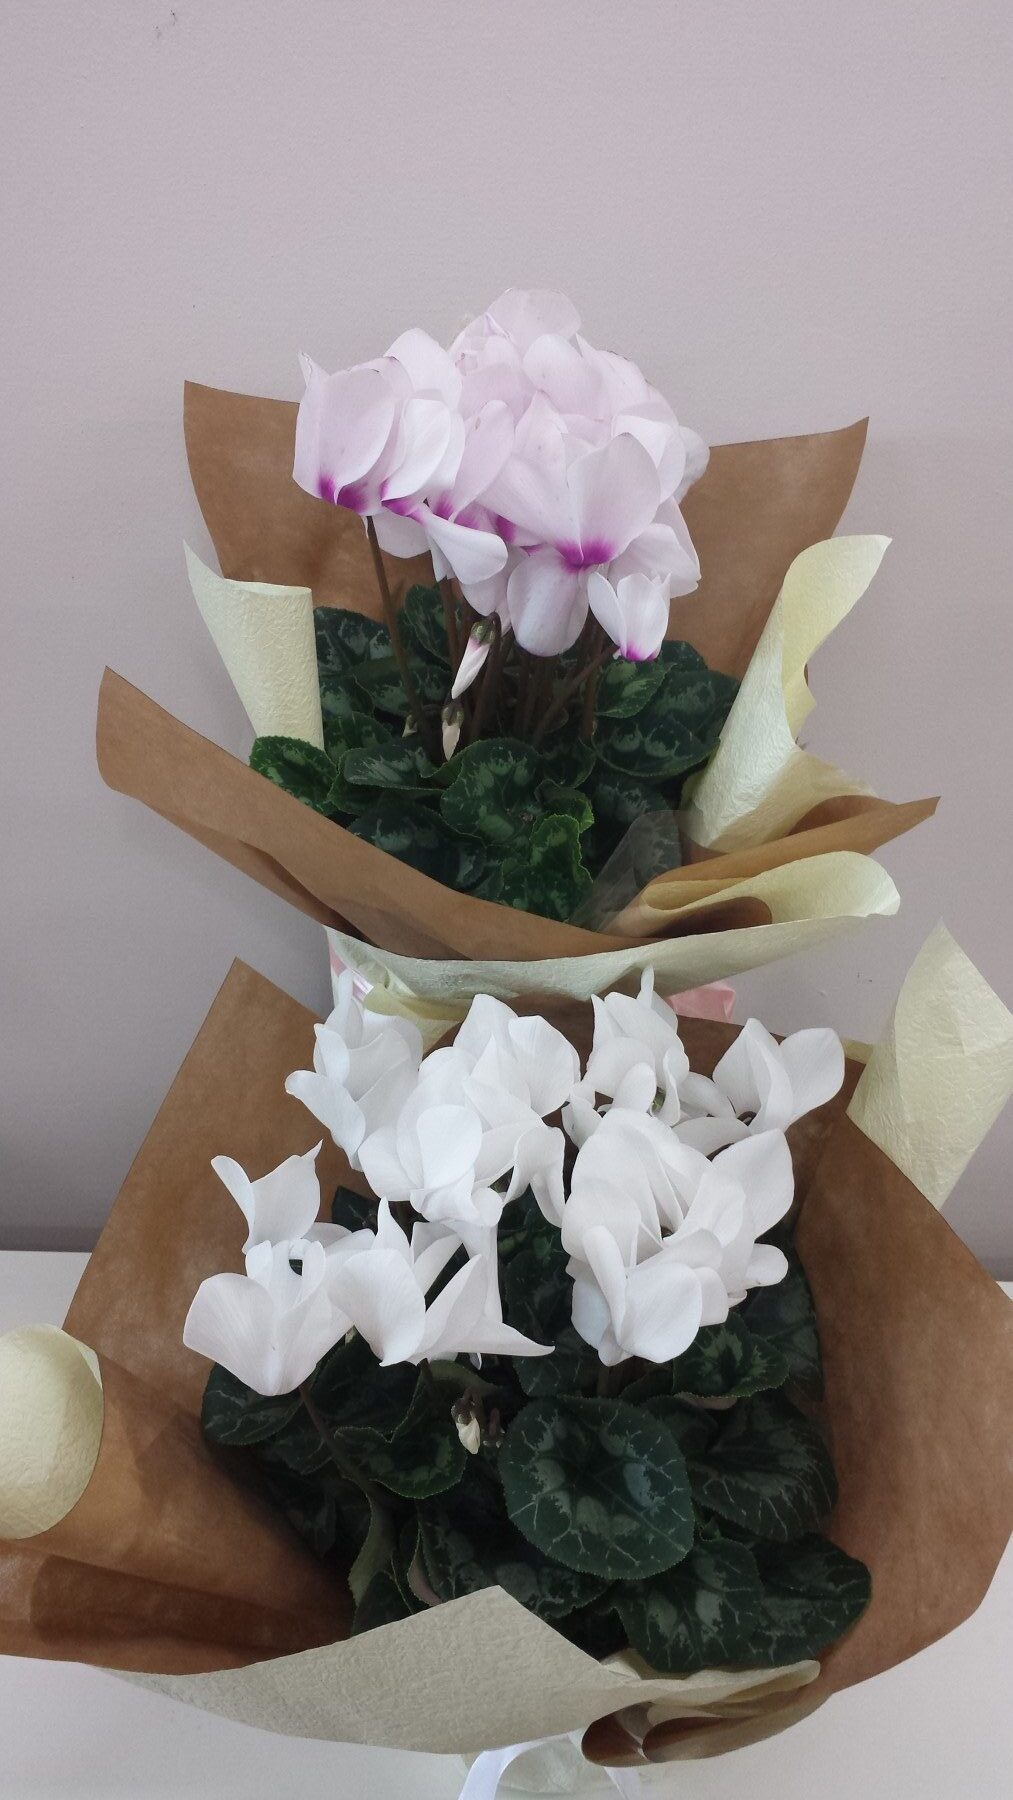 Flowering Cyclamen plant gift wrapped.